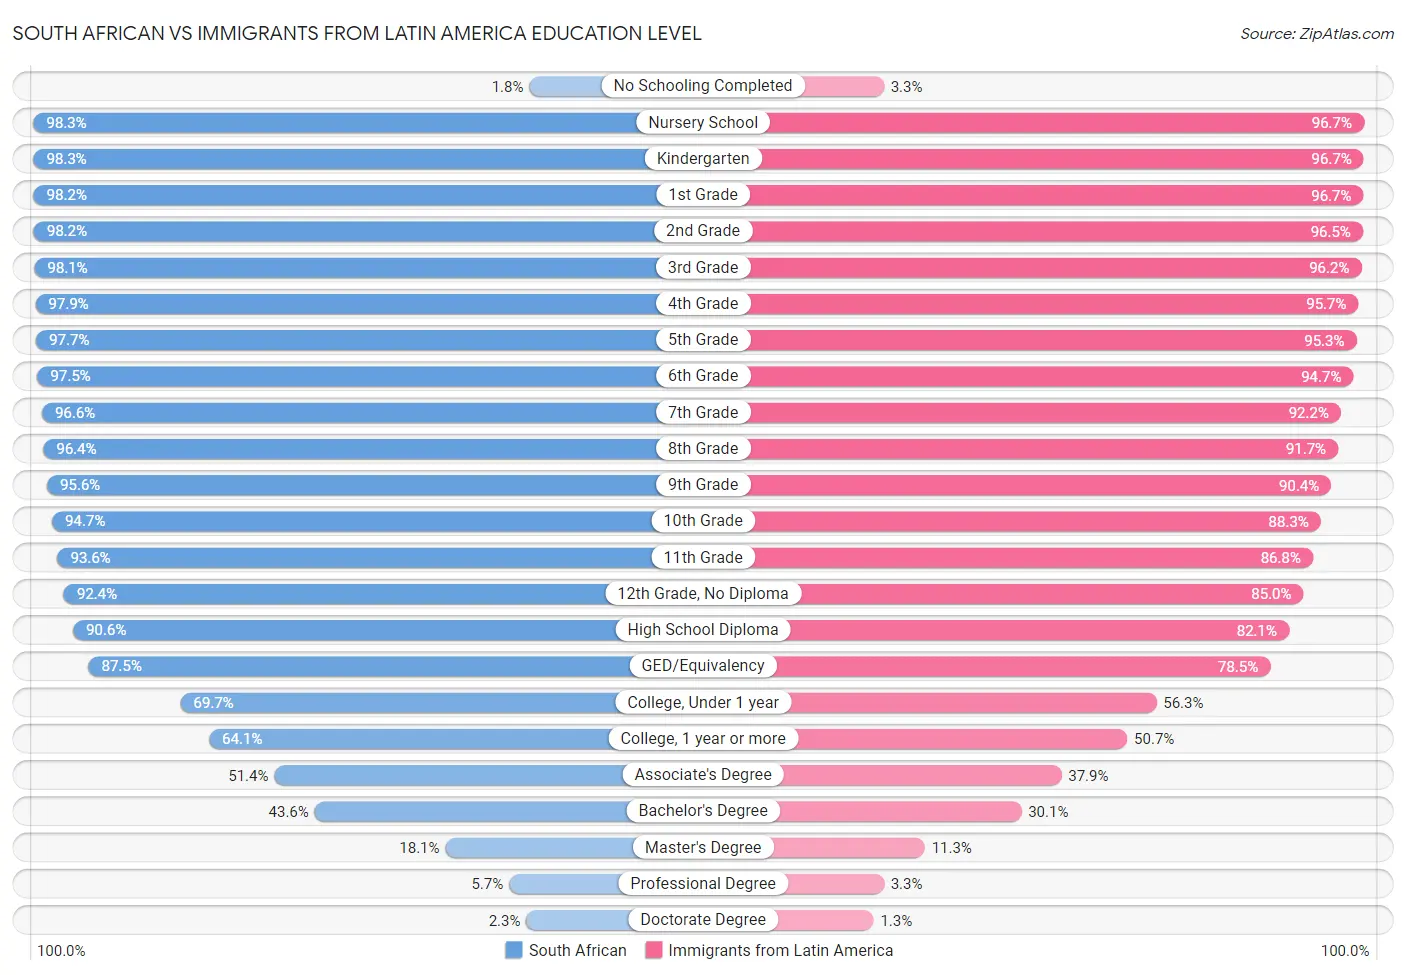 South African vs Immigrants from Latin America Education Level